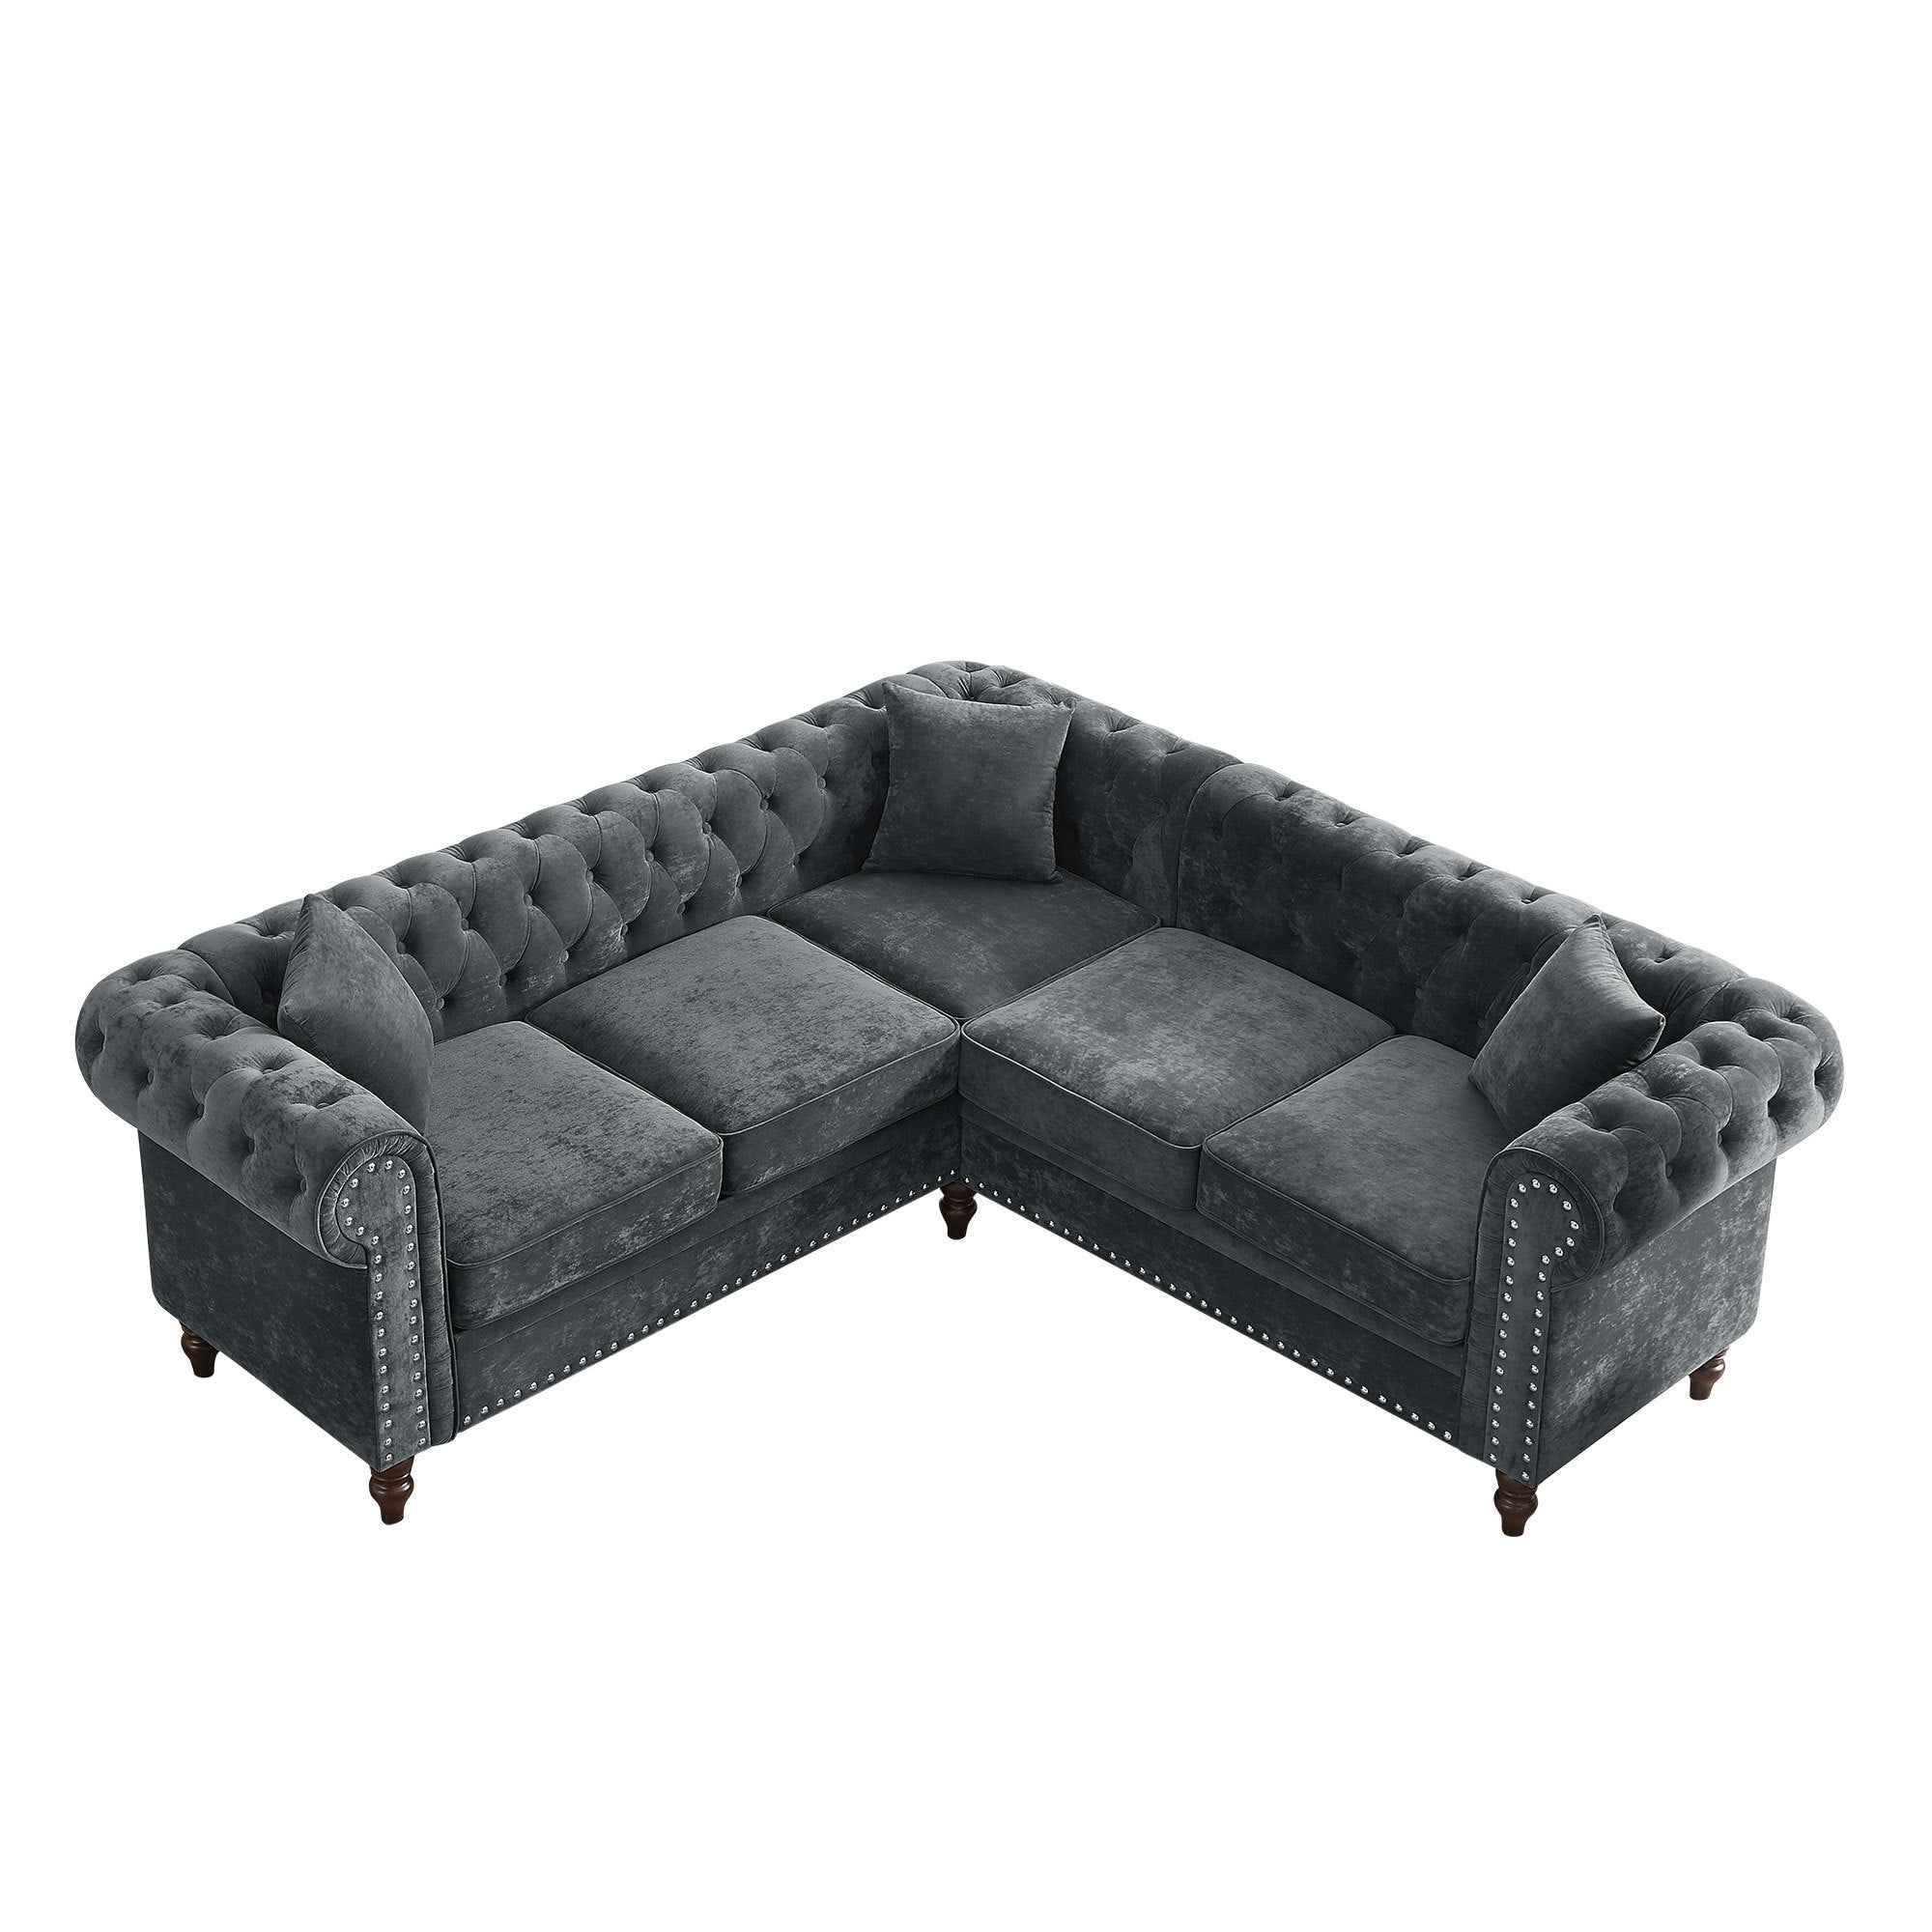 80" Deep Tufted Velvet Chesterfield Gray L-Shaped Sectional-Stationary Sectionals-American Furniture Outlet